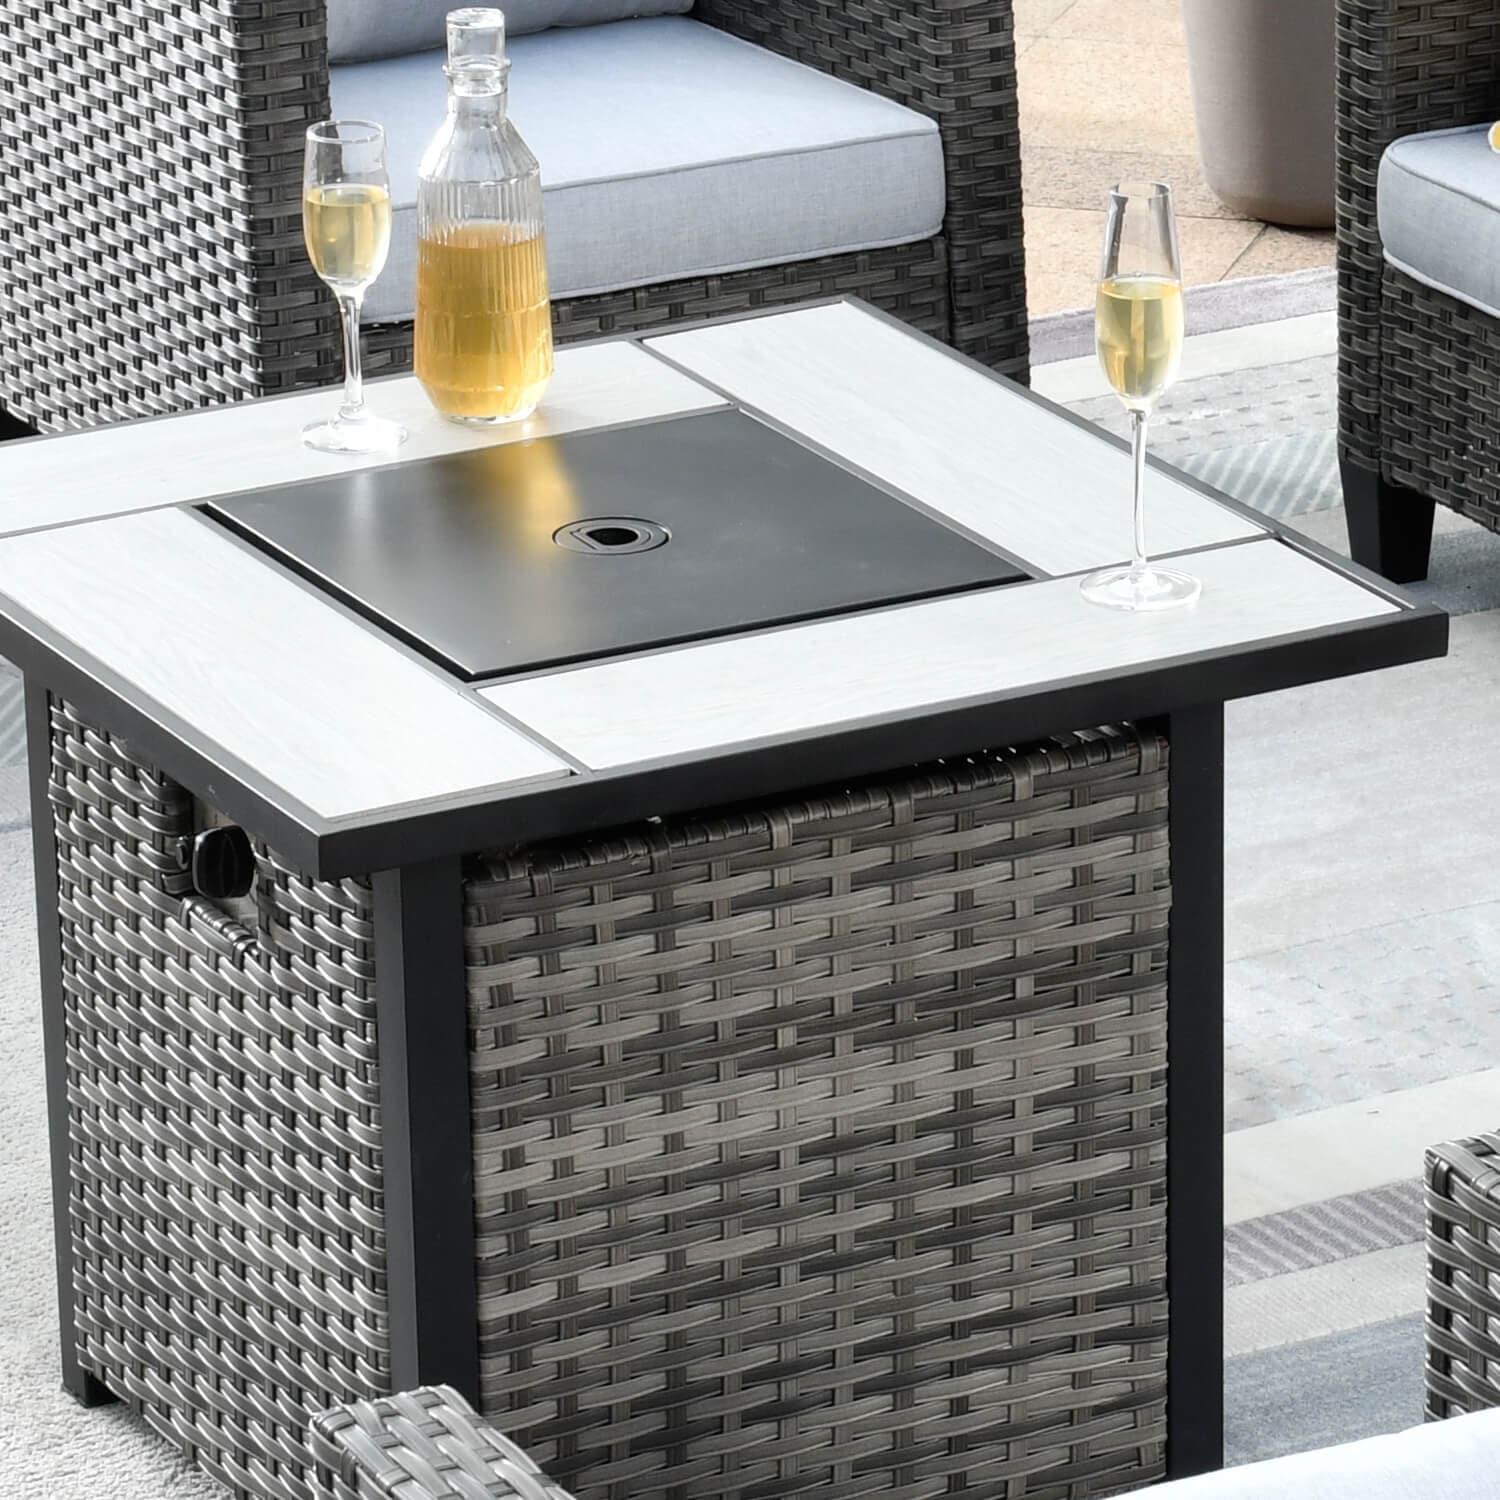 Ovios Patio Vultros 8-Piece Conversation Set with 30'' Propane Fire Pit Table